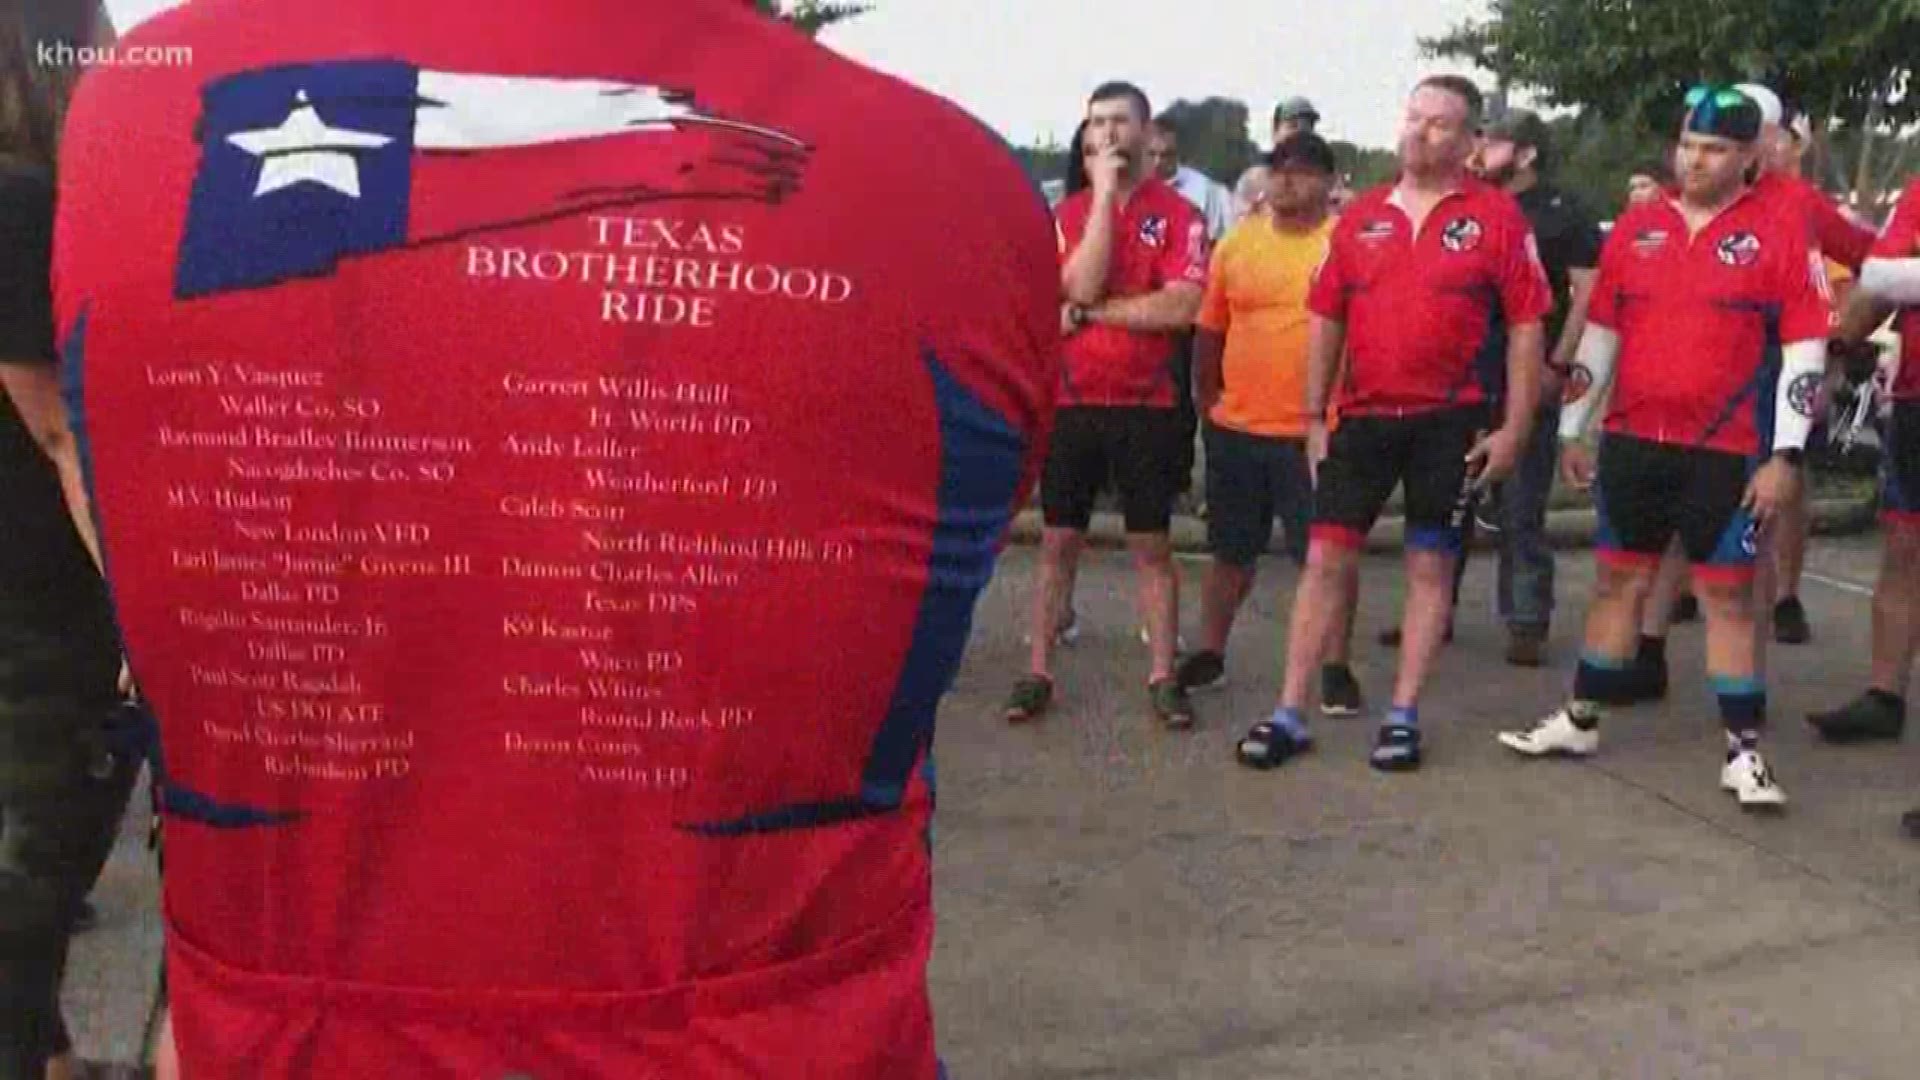 Police officers and EMS personnel from across the state started a 650-mile ride to honor emergency responders who died in the line of duty. The ride is expected to last eight days, averaging about 80 to 100 miles. KHOU 11 investigative reporter Cheryl Mercedes had the chance to ride alongside the Texas Brotherhood ride Saturday as it started in Hempstead.